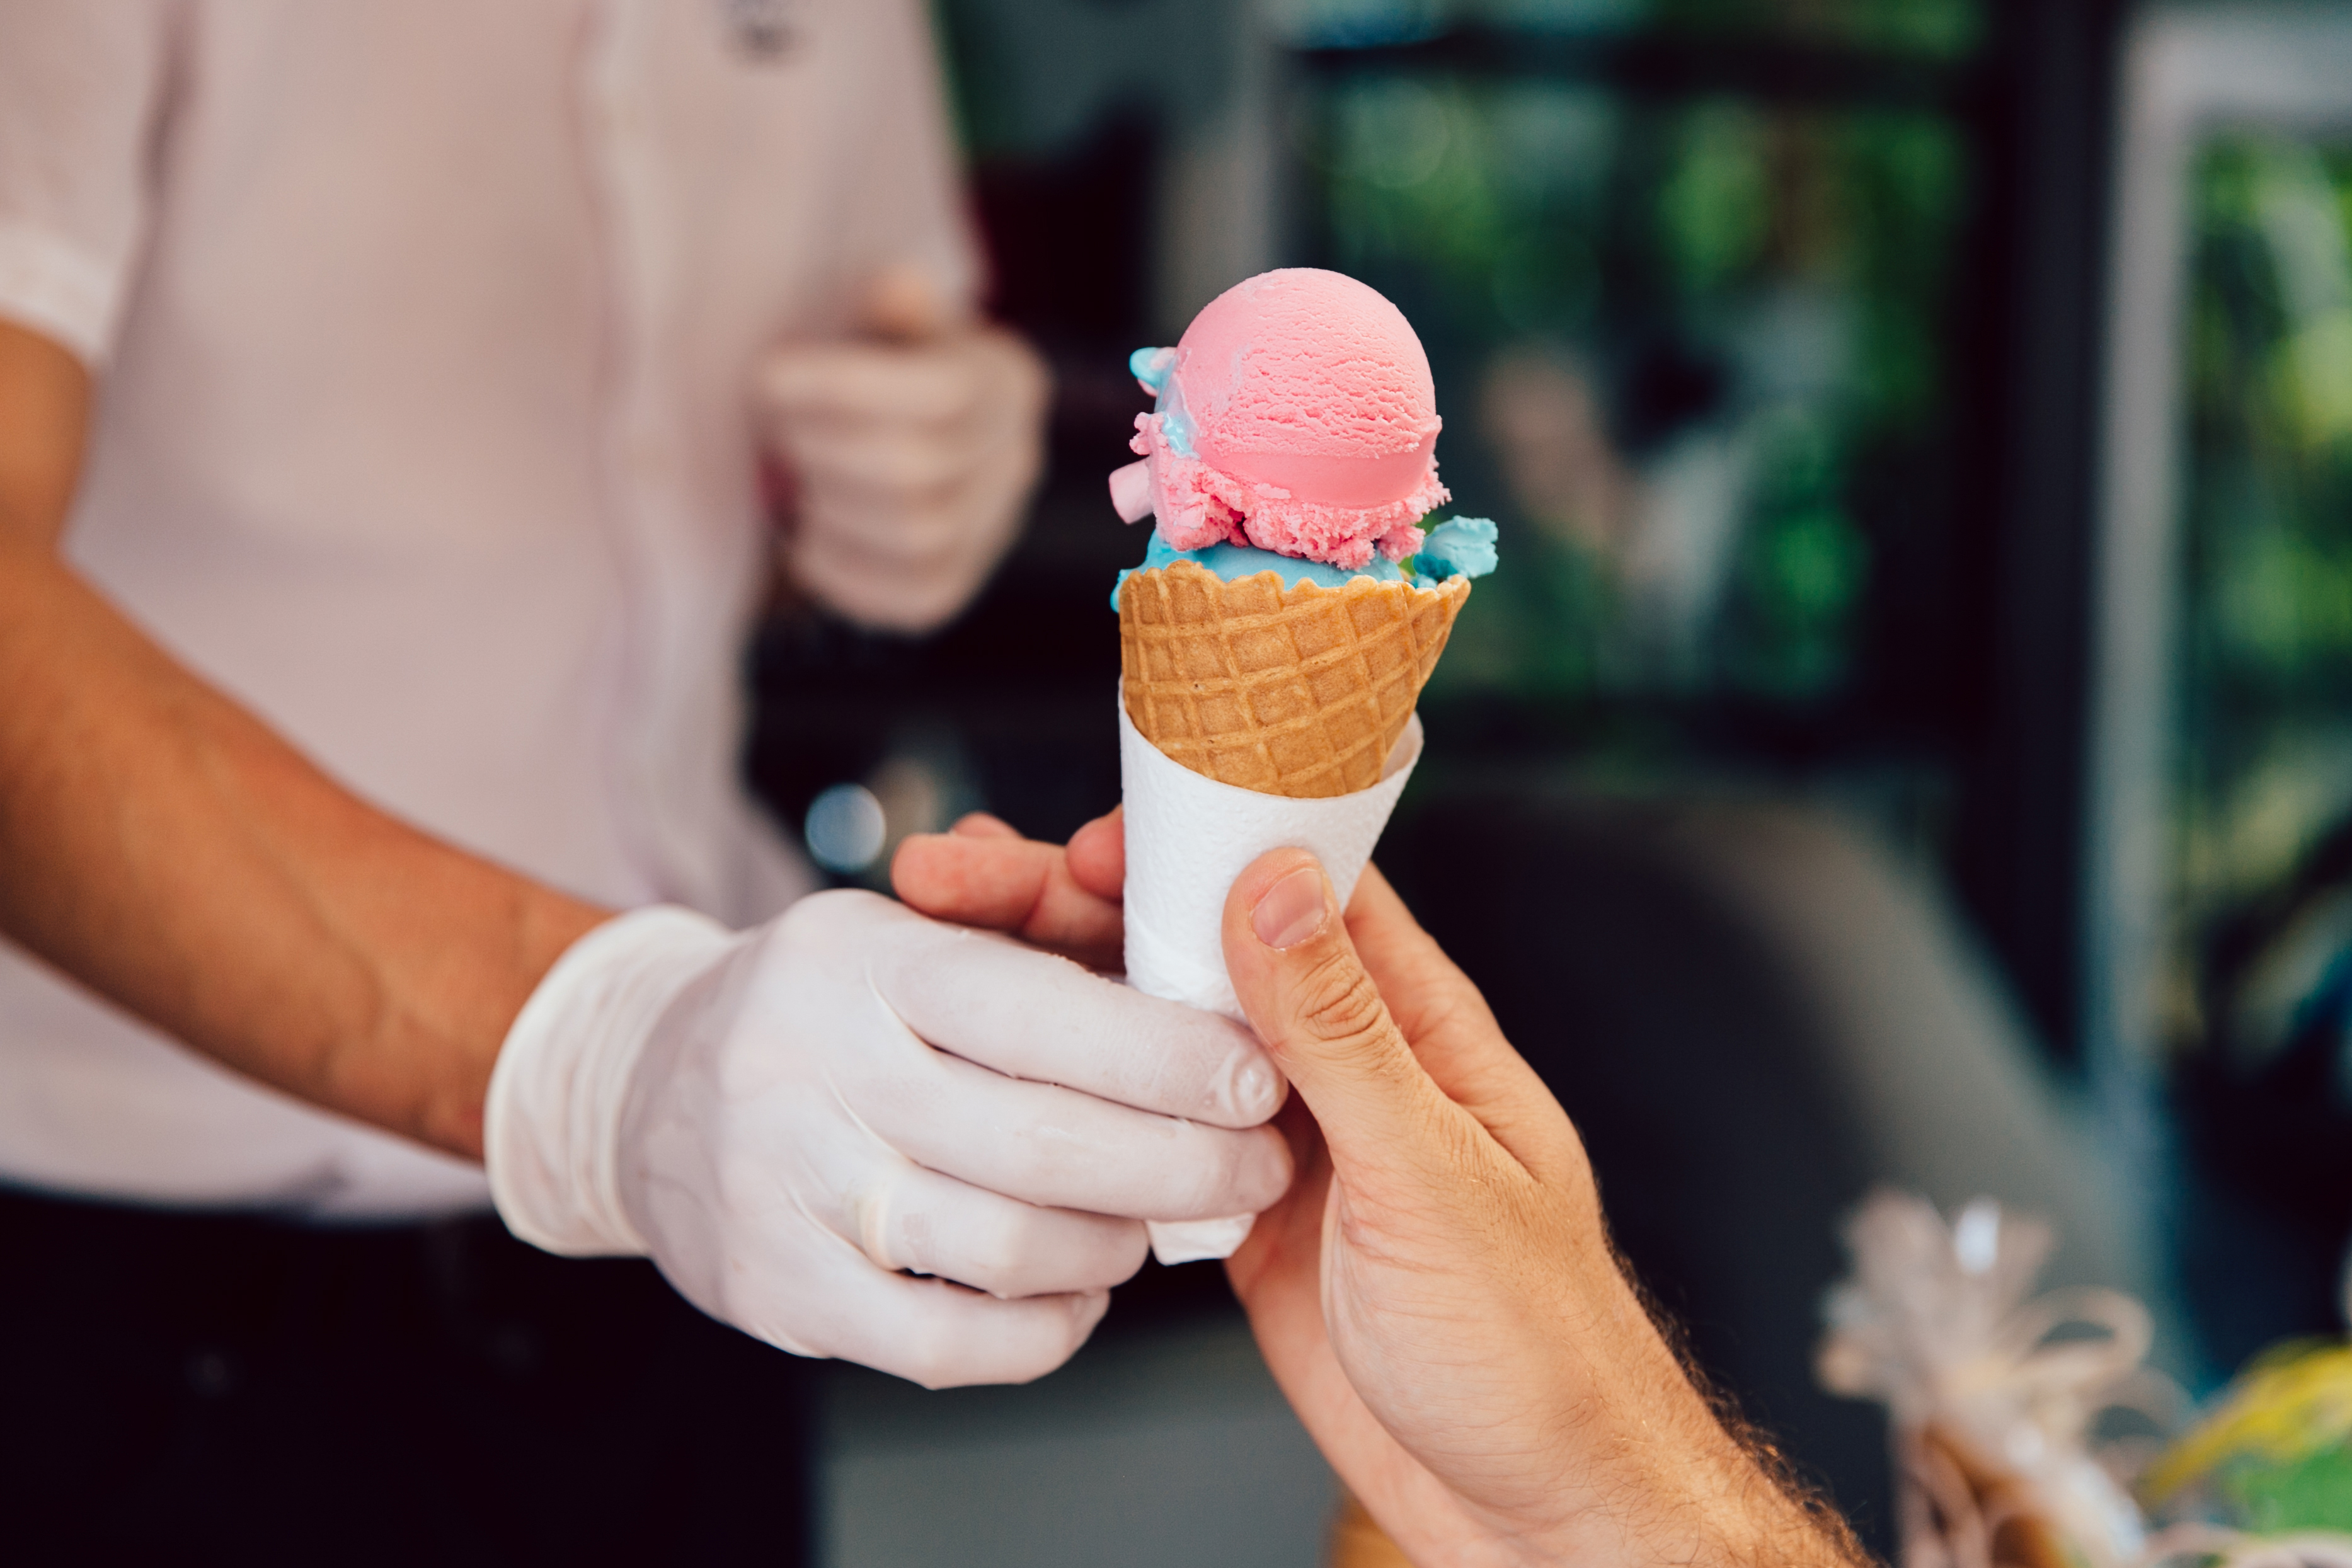 A gloved hand passes off an ice cream cone to an ungloved hand. It’s filled with pink and blue scoops of ice cream. 